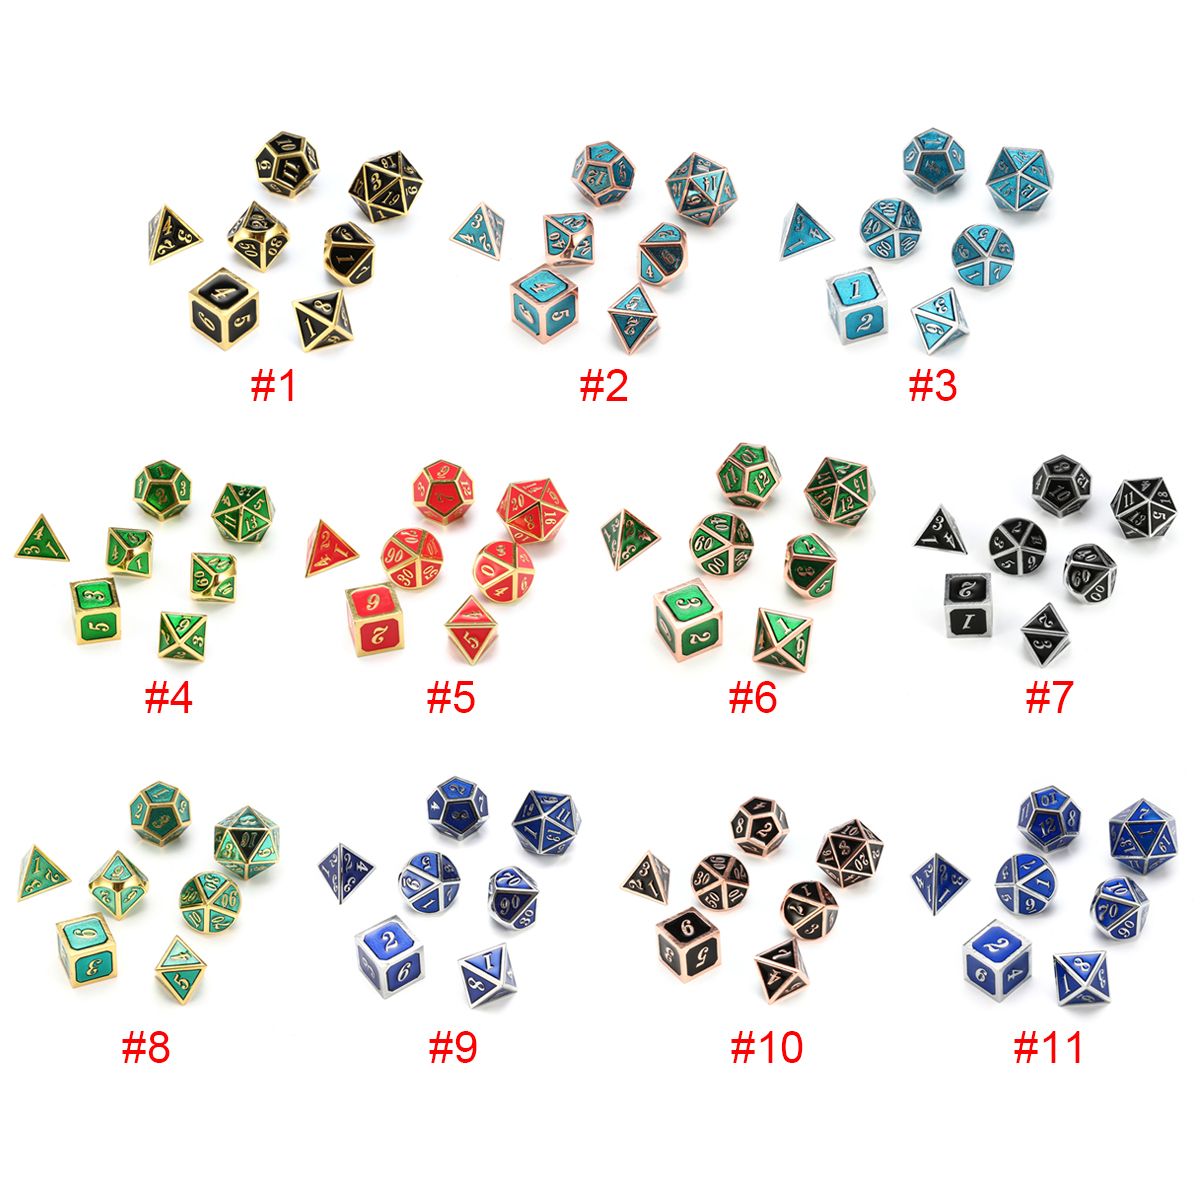 7pcs-Zinc-Alloy-Multisided-Dices-Set-Enamel-Embossed-Heavy-Metal-Polyhedral-Dice-With-Bag-1272100